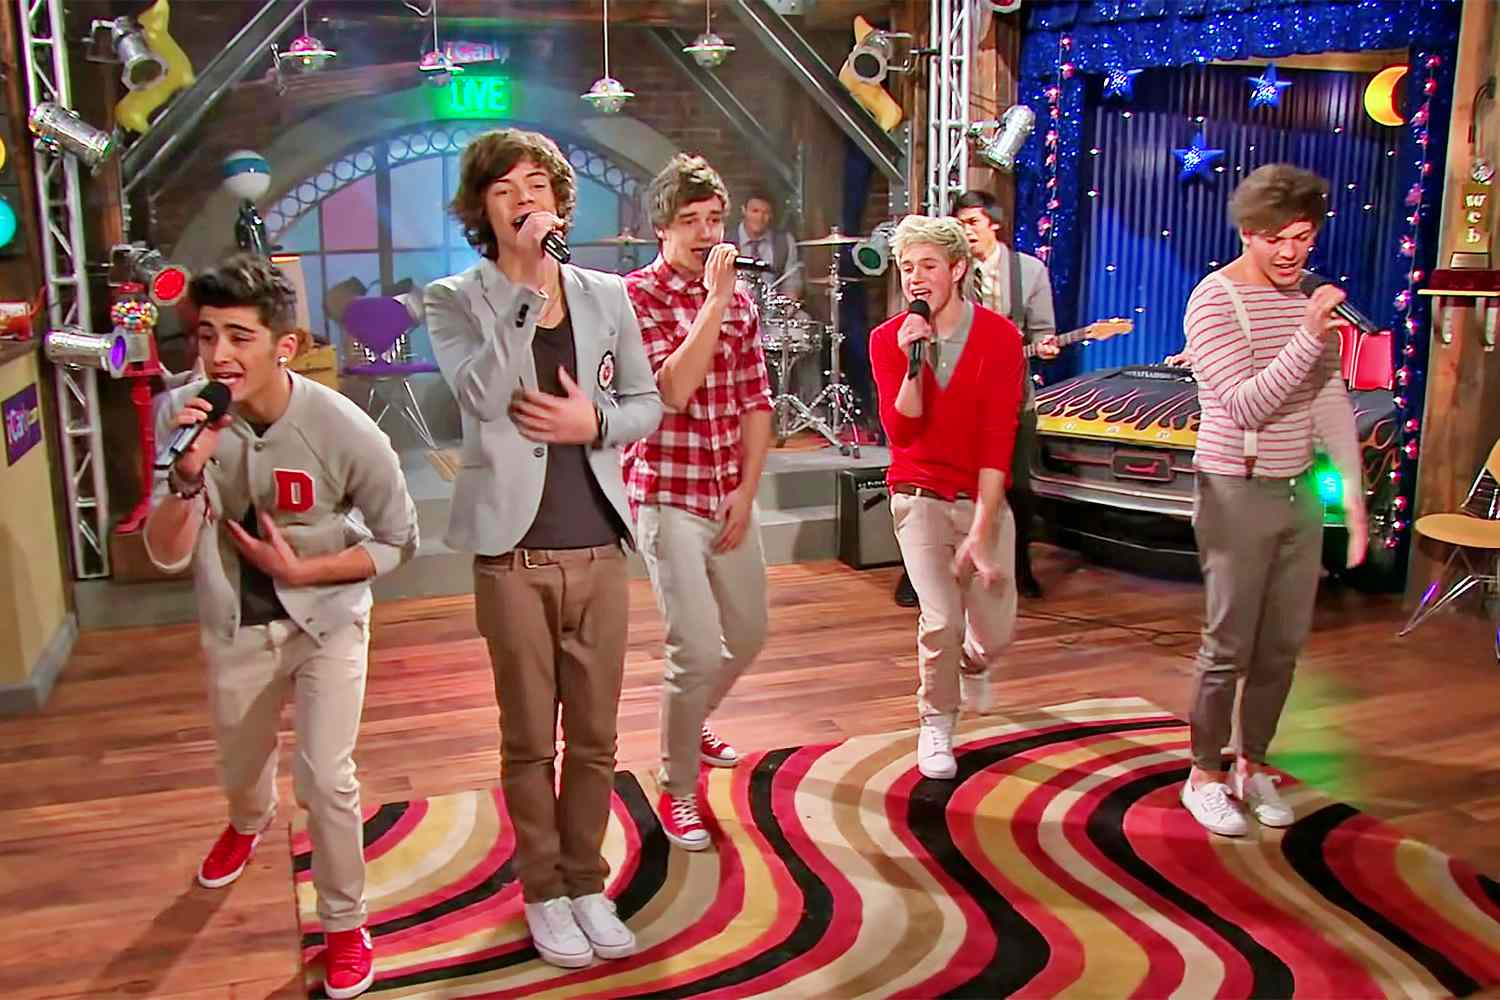 https://www.youtube.com/watch?v=Rb1gT8F3zTQ iCarly Meets One Direction! 🤩 ft. 1D Performing "What Makes You Beautiful" NickRewind